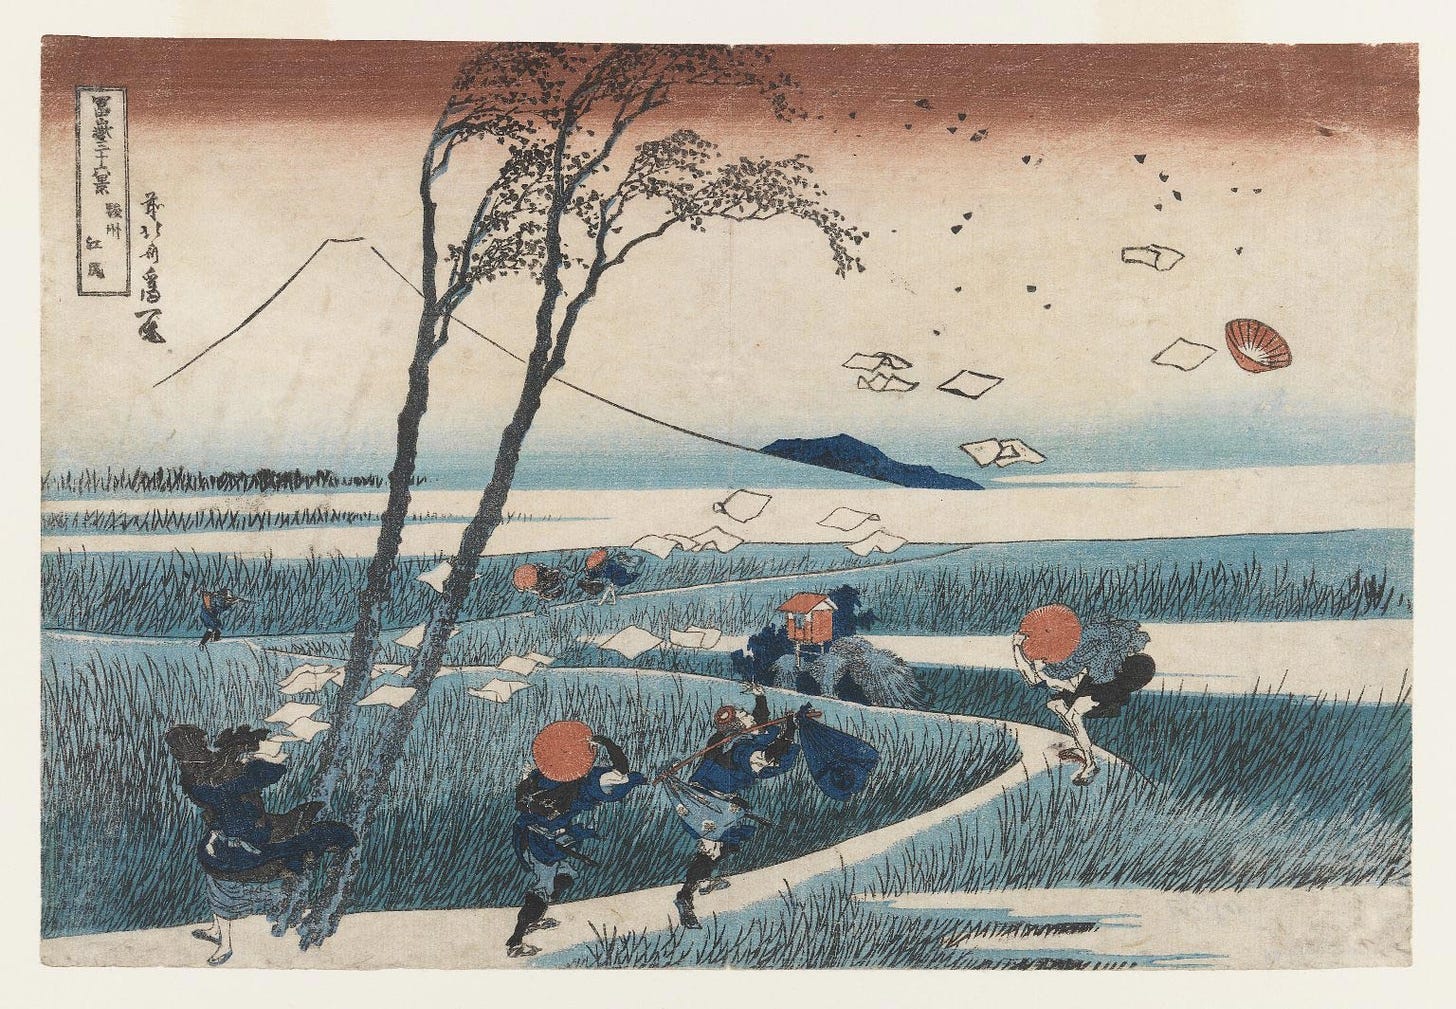 An Ukiyo-e print by Japanese artist Hokusai, depicting several people overcome by a gust of wind. A tall tree bends in the foreground, one of the figures was holding a sheaf of papers which are now airborne, others are holding their hats. All are walking down a path in a grassy marsh. In the far background is an outline of Mount Fuji.